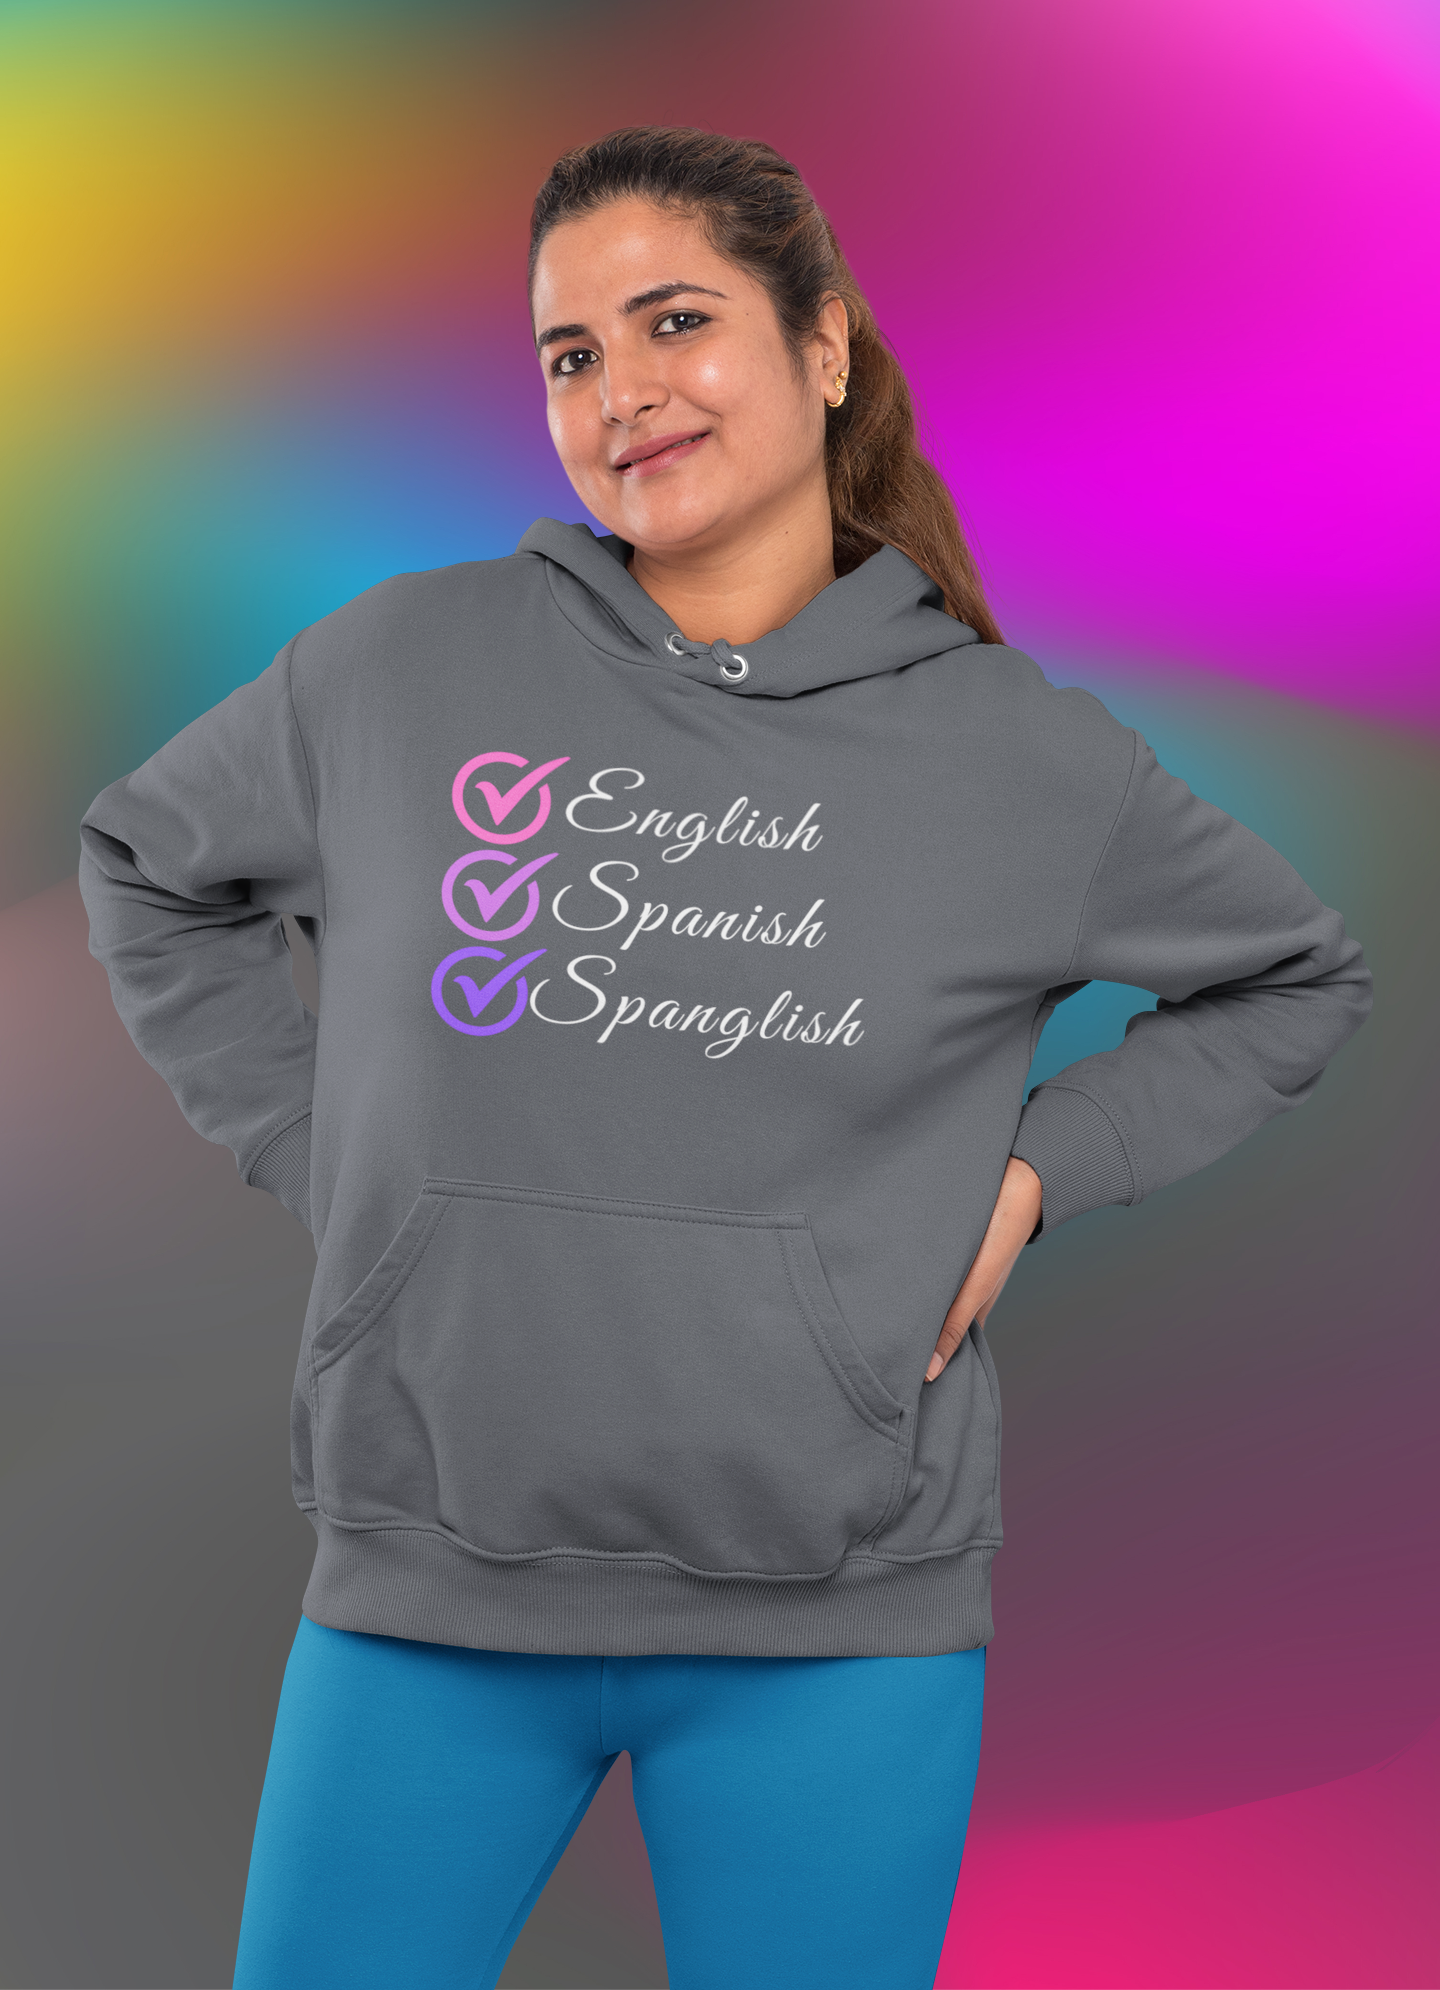 English, Spanish, Spanglish: Embrace Multiculturalism with Our Women's Premium Hoodie